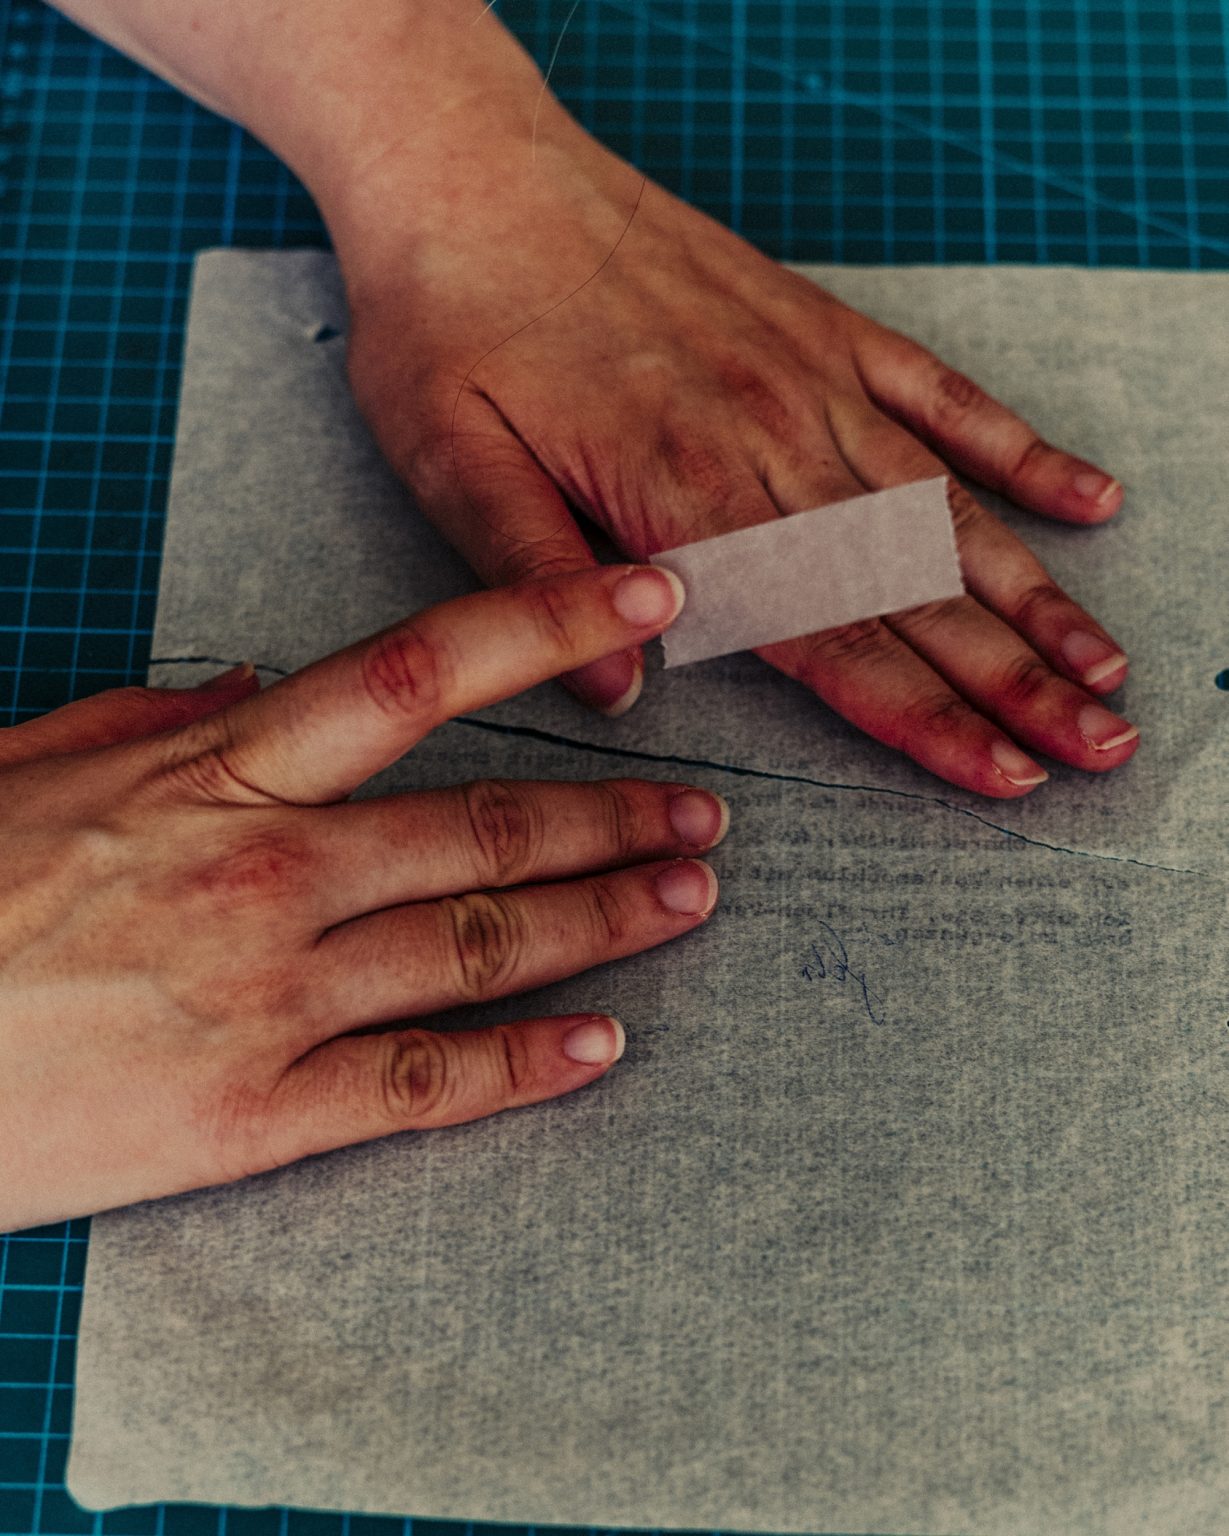 Ruth Zimmermann, an archivist, delicately applies tape to the back of an assembled document in Berlin, July 16, 2021. Researchers are working to reassemble, scrap by scrap, some 40 to 55 million pieces of paper that were torn up and stuffed into sacks by the East German secret police in the final days of the German Democratic Republic. (Mustafah Abdulaziz/The New York Times)     <span style="color: #ff0000">*** SPECIAL   FEE   APPLIES ***</span> *** Local Caption *** 16.15556747